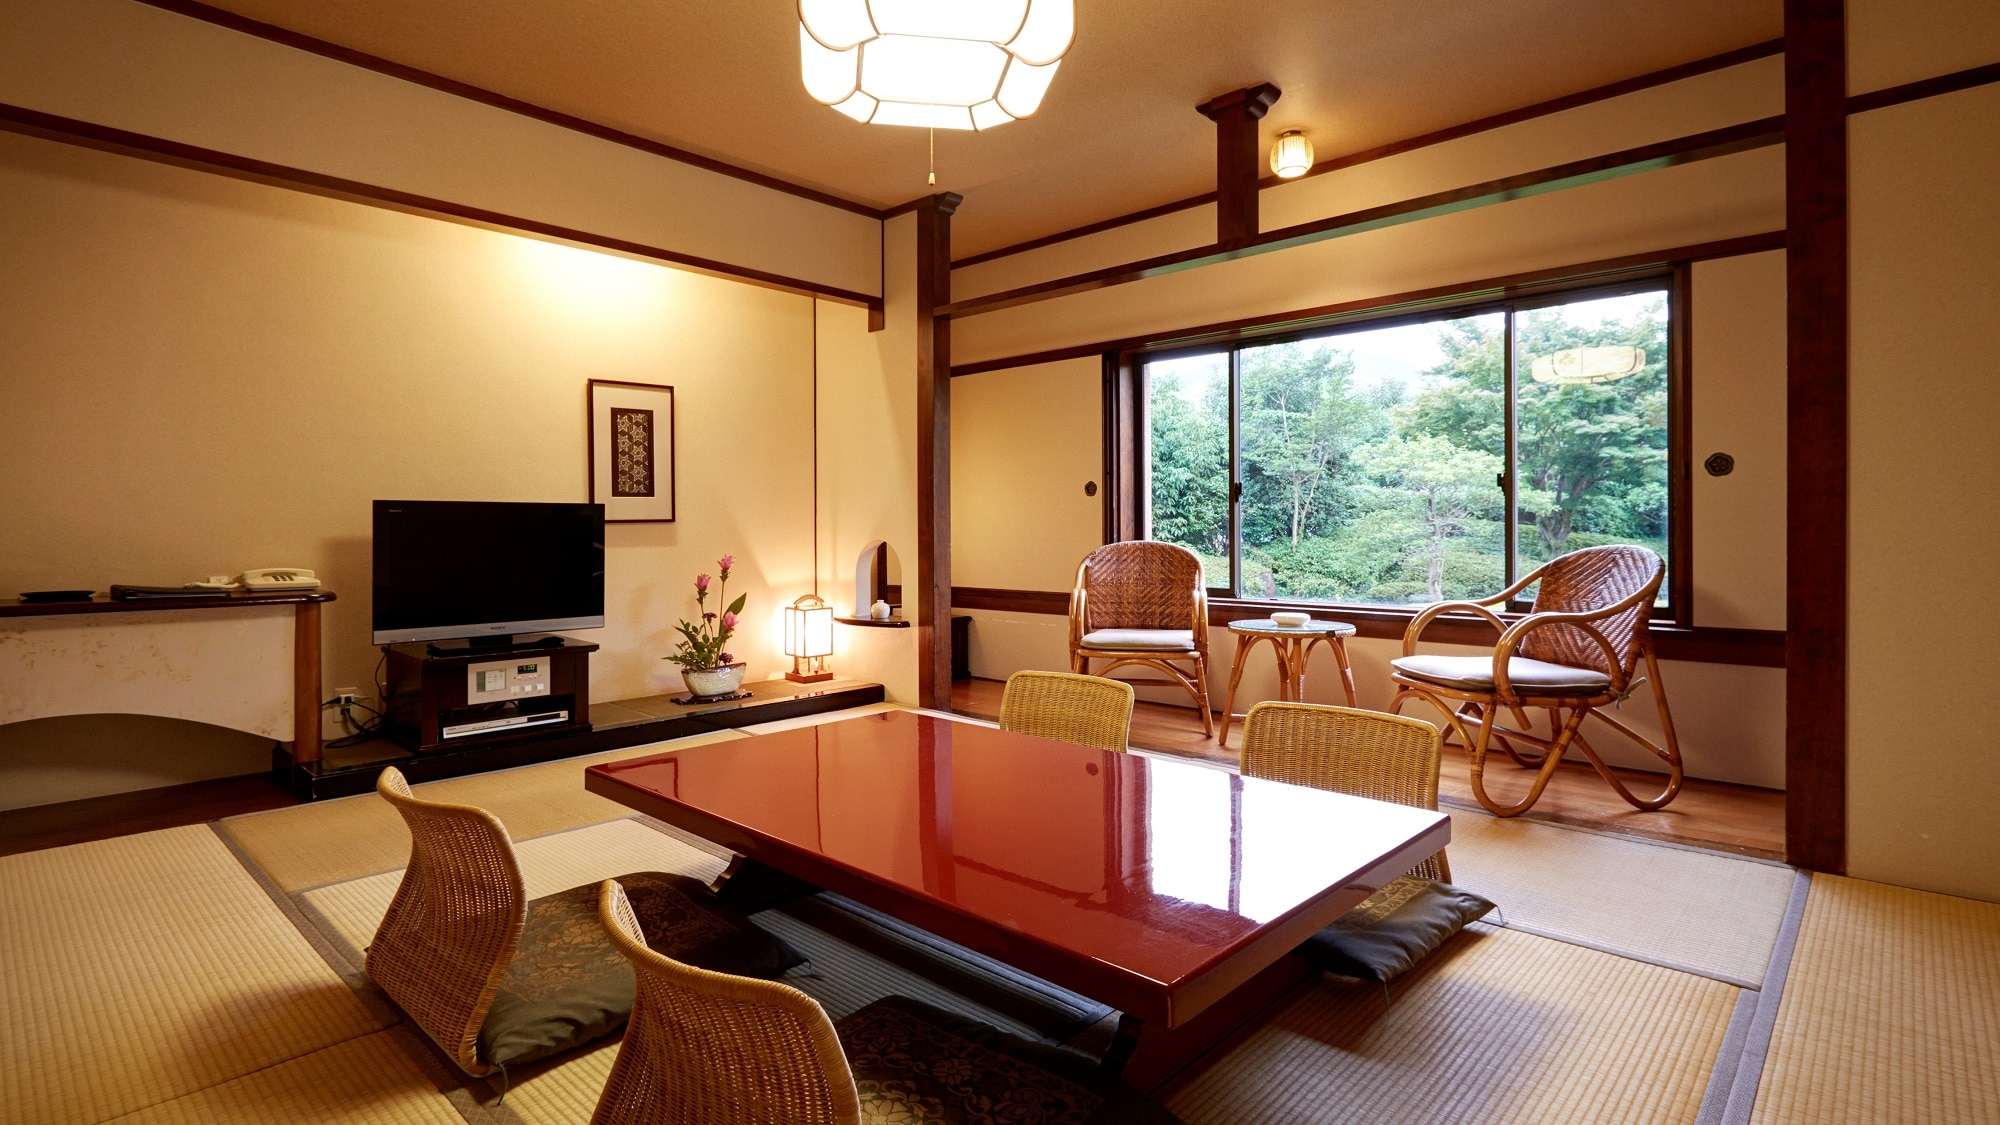 A quaint Japanese-style room recommended for families and groups